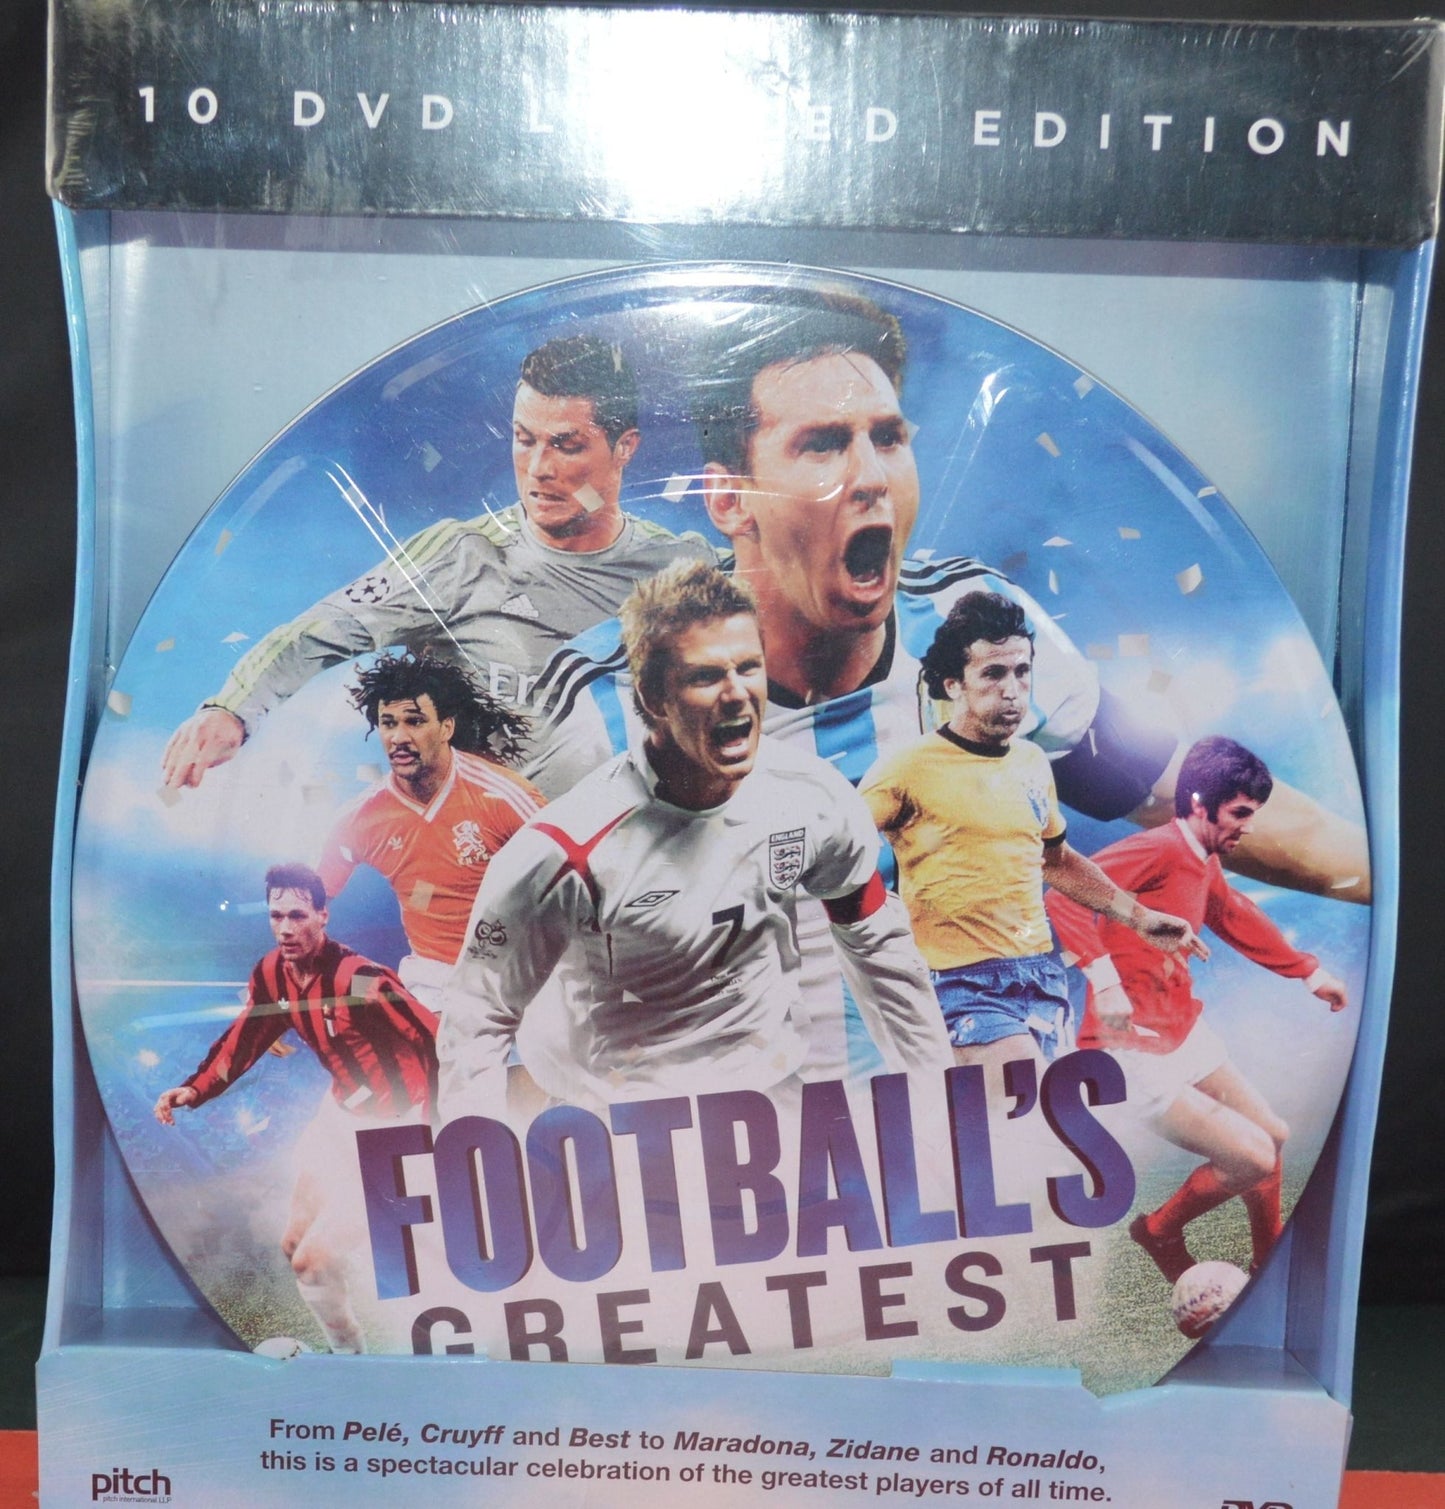 AS NEW 10 DVD LIMITED EDITION COLLECTION FOOTBALL'S GREATEST(PREVIOUSLY OWNED) UNOPENED - TMD167207